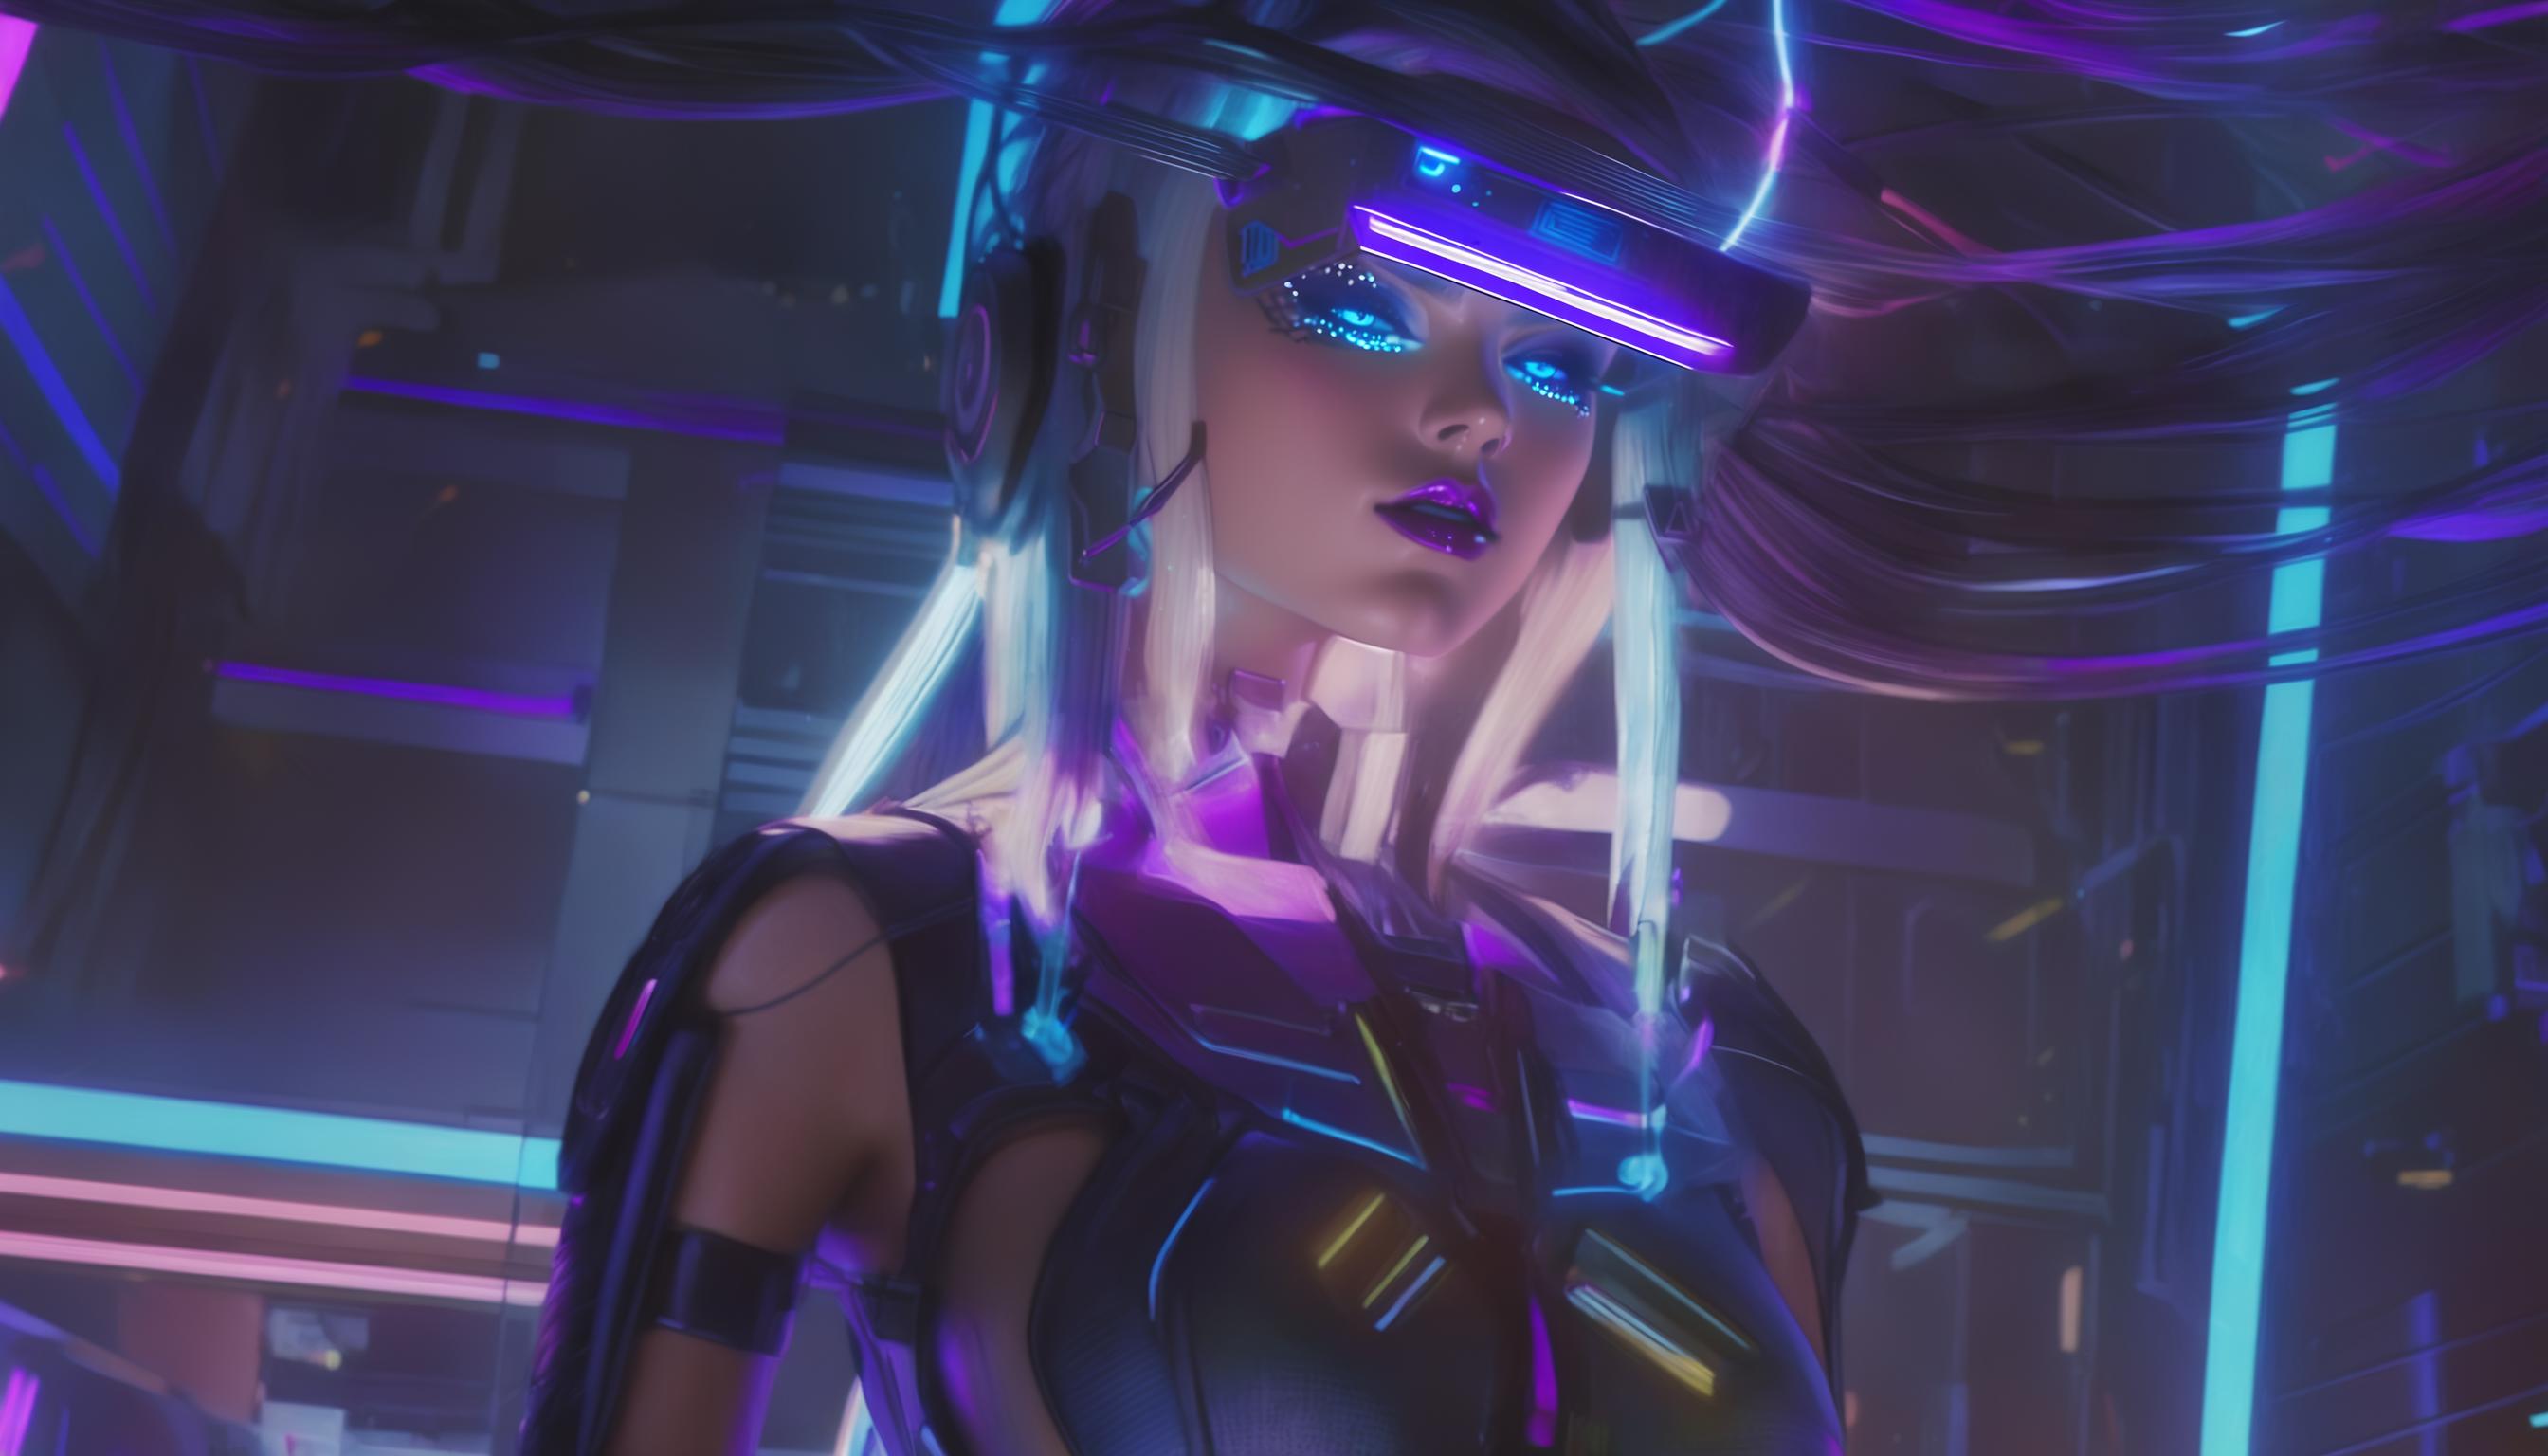 A computer-generated image of a woman wearing a purple helmet and futuristic gear.